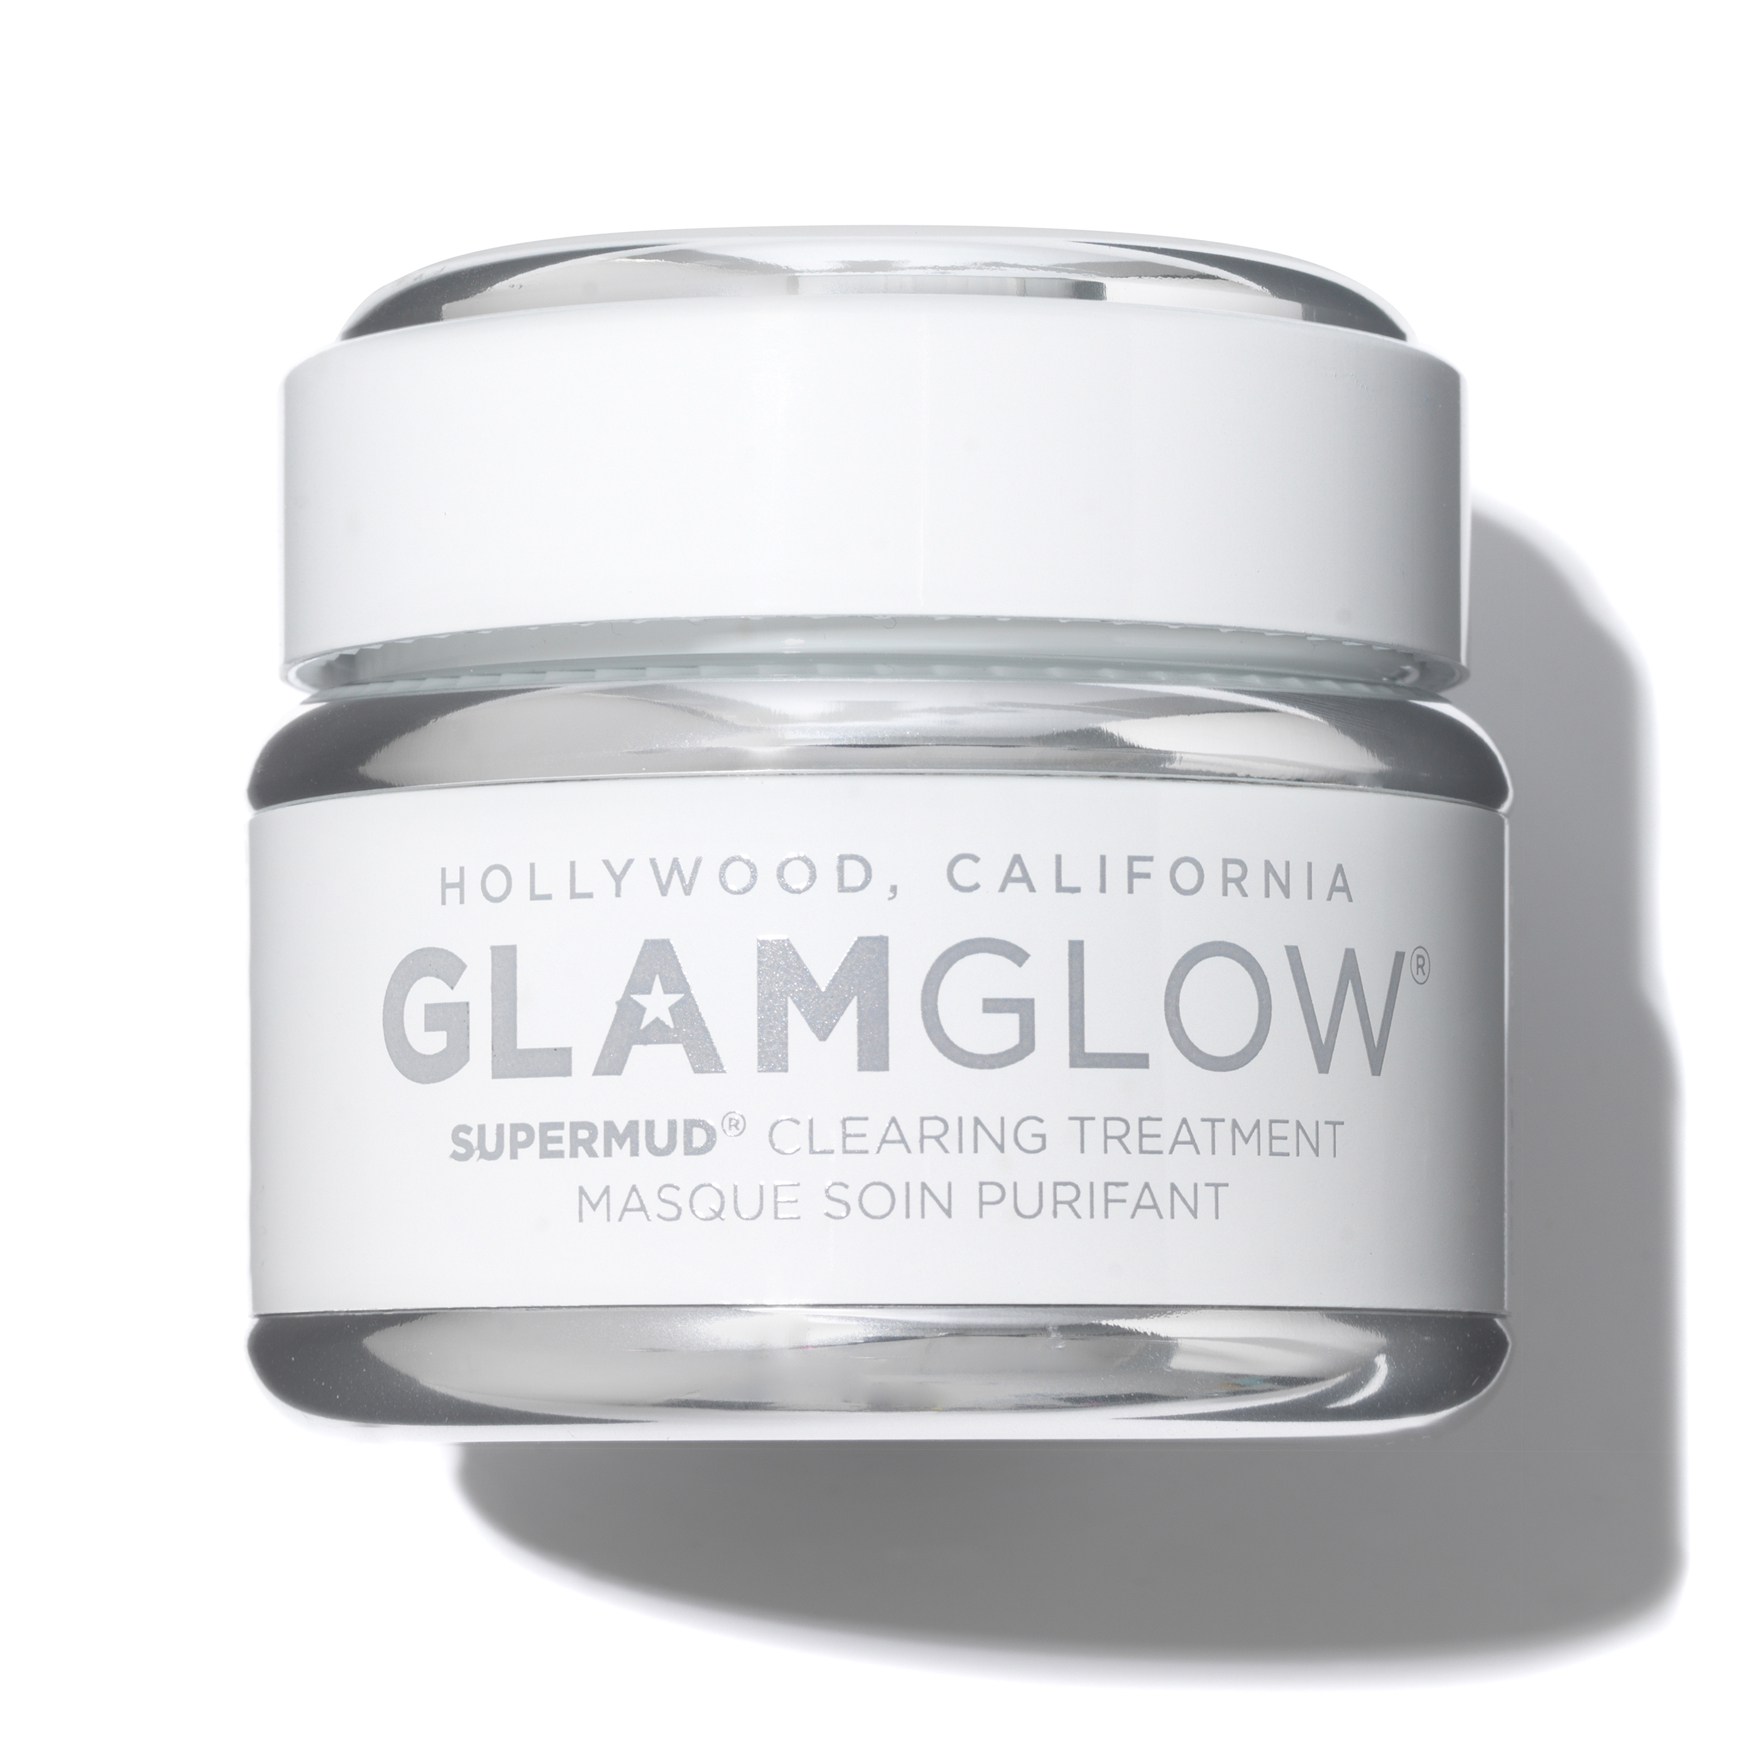 Ale Catastrofe vlam Glamglow Supermud Clearing Treatment | Space NK